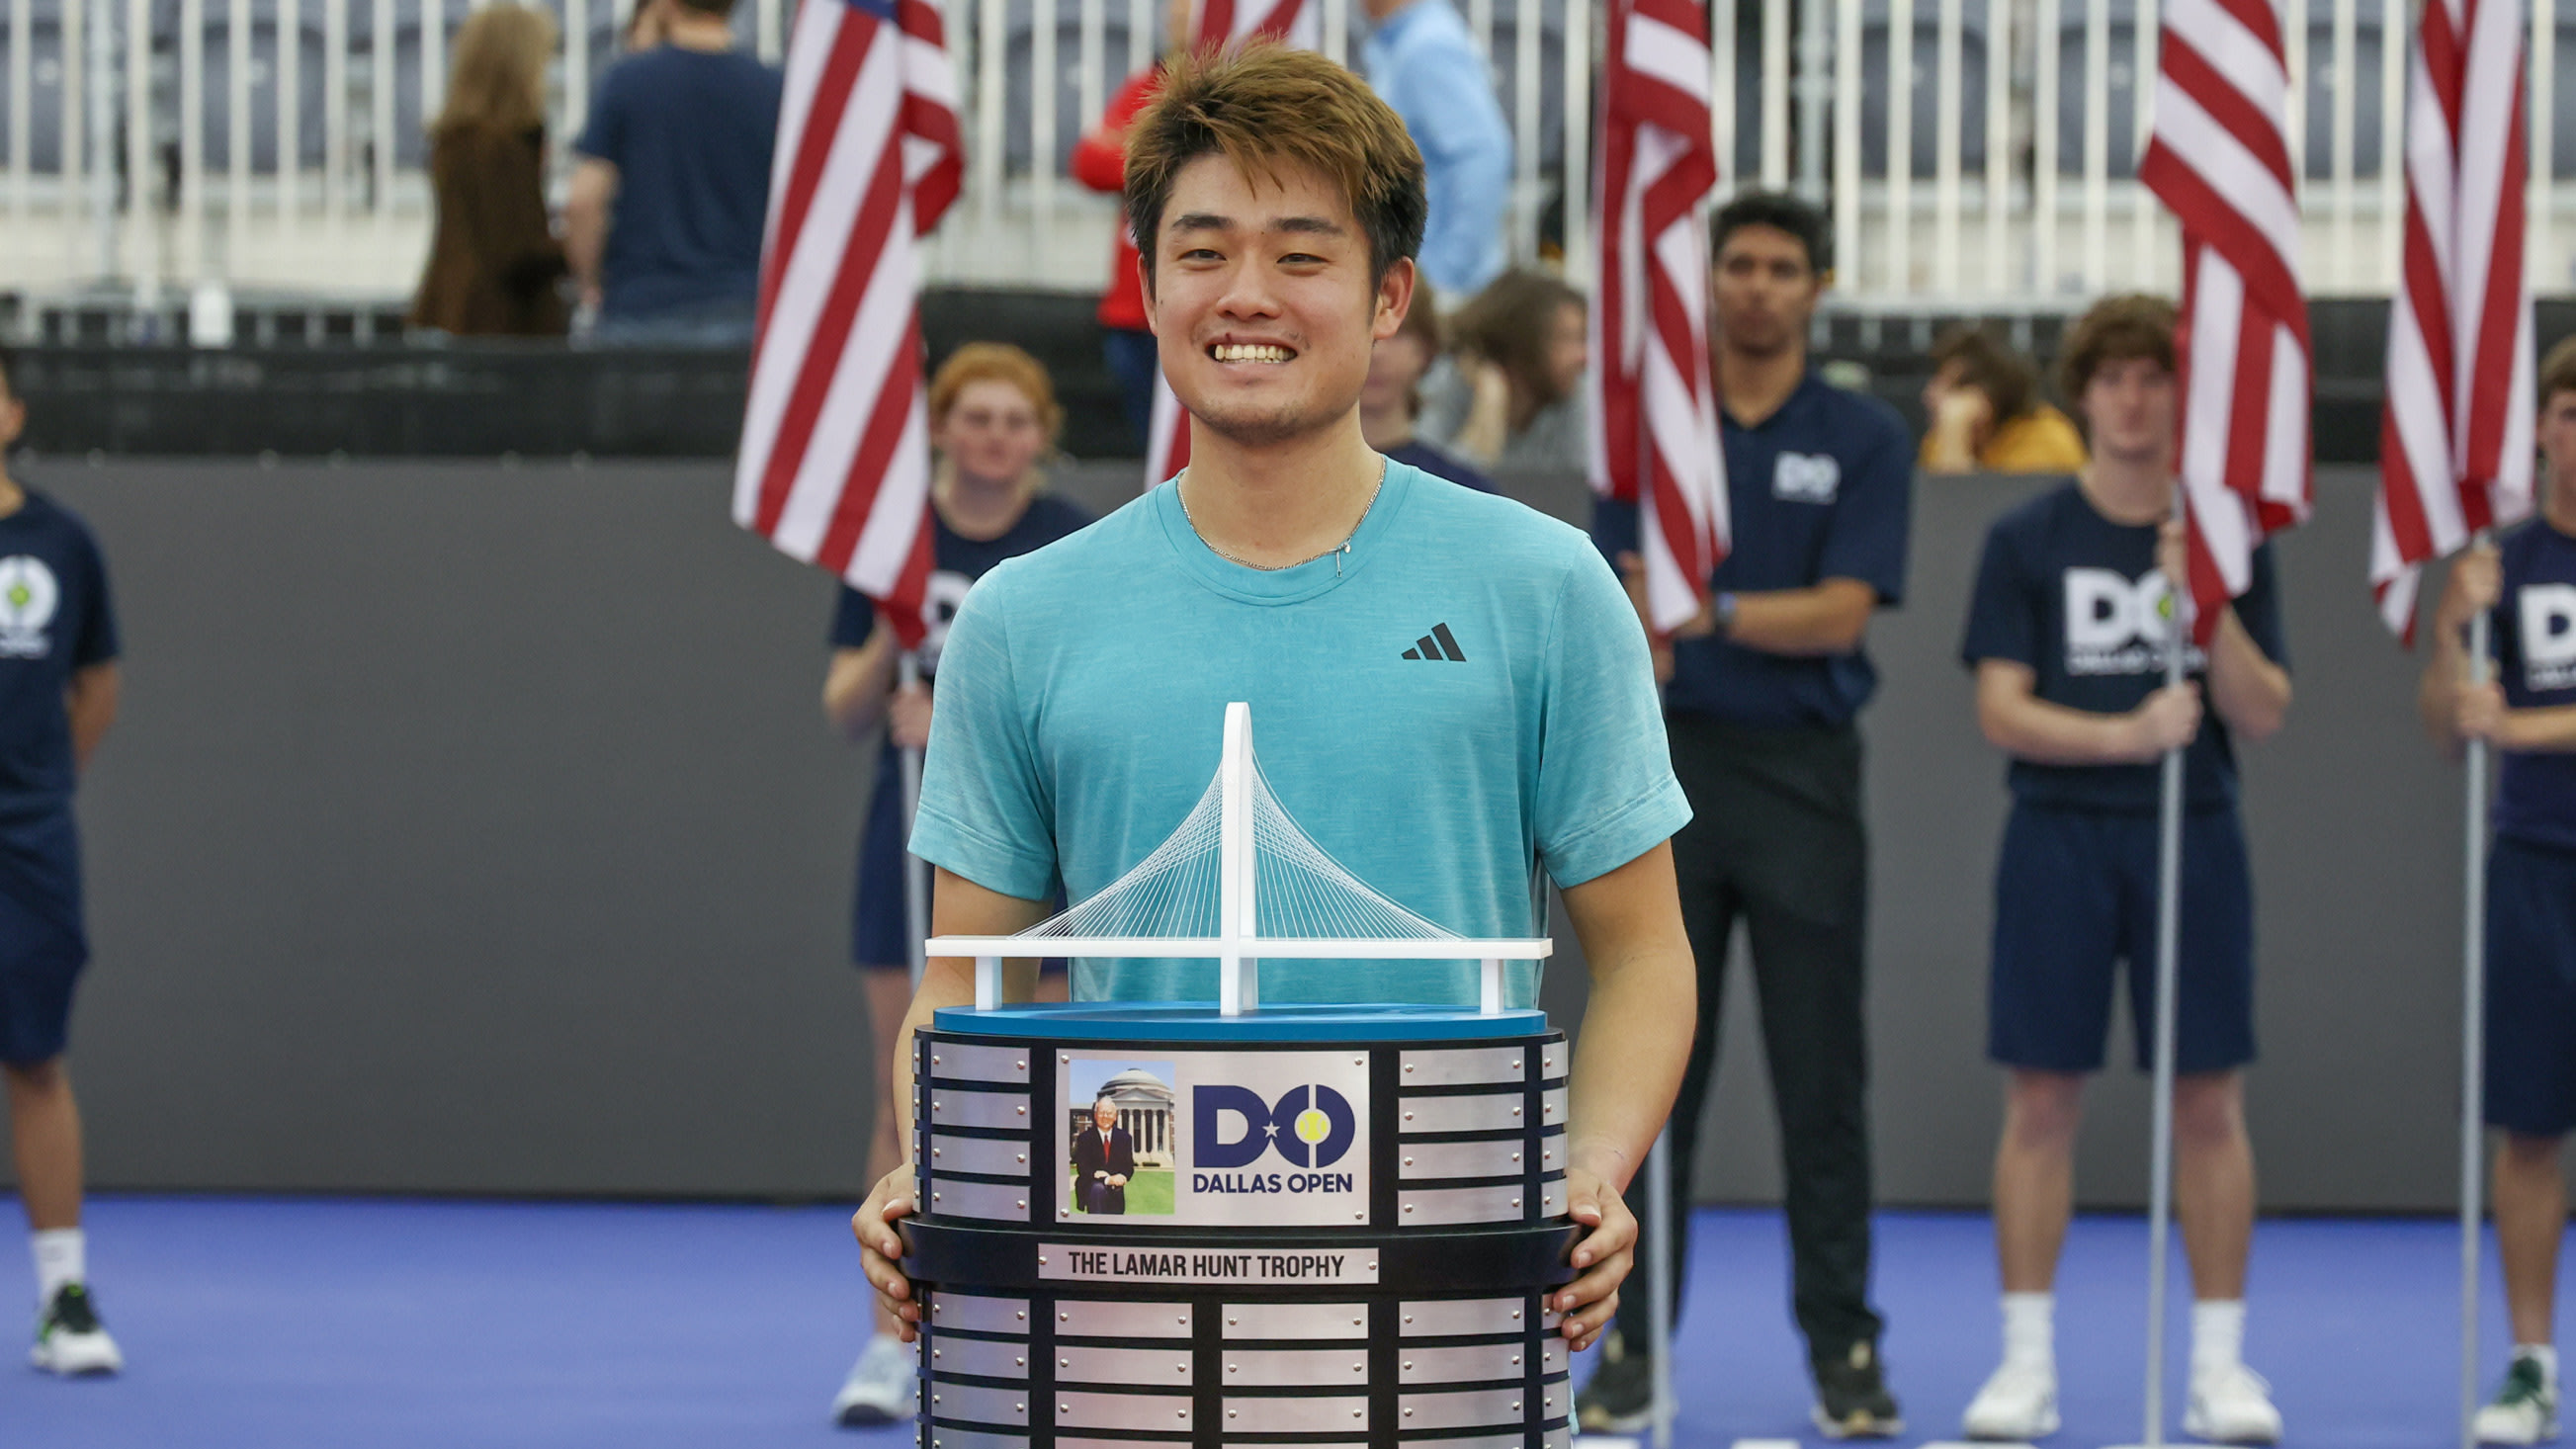 Chinas Wu Yibing upsets home favorite John Isner to claim historic first ATP title in Dallas